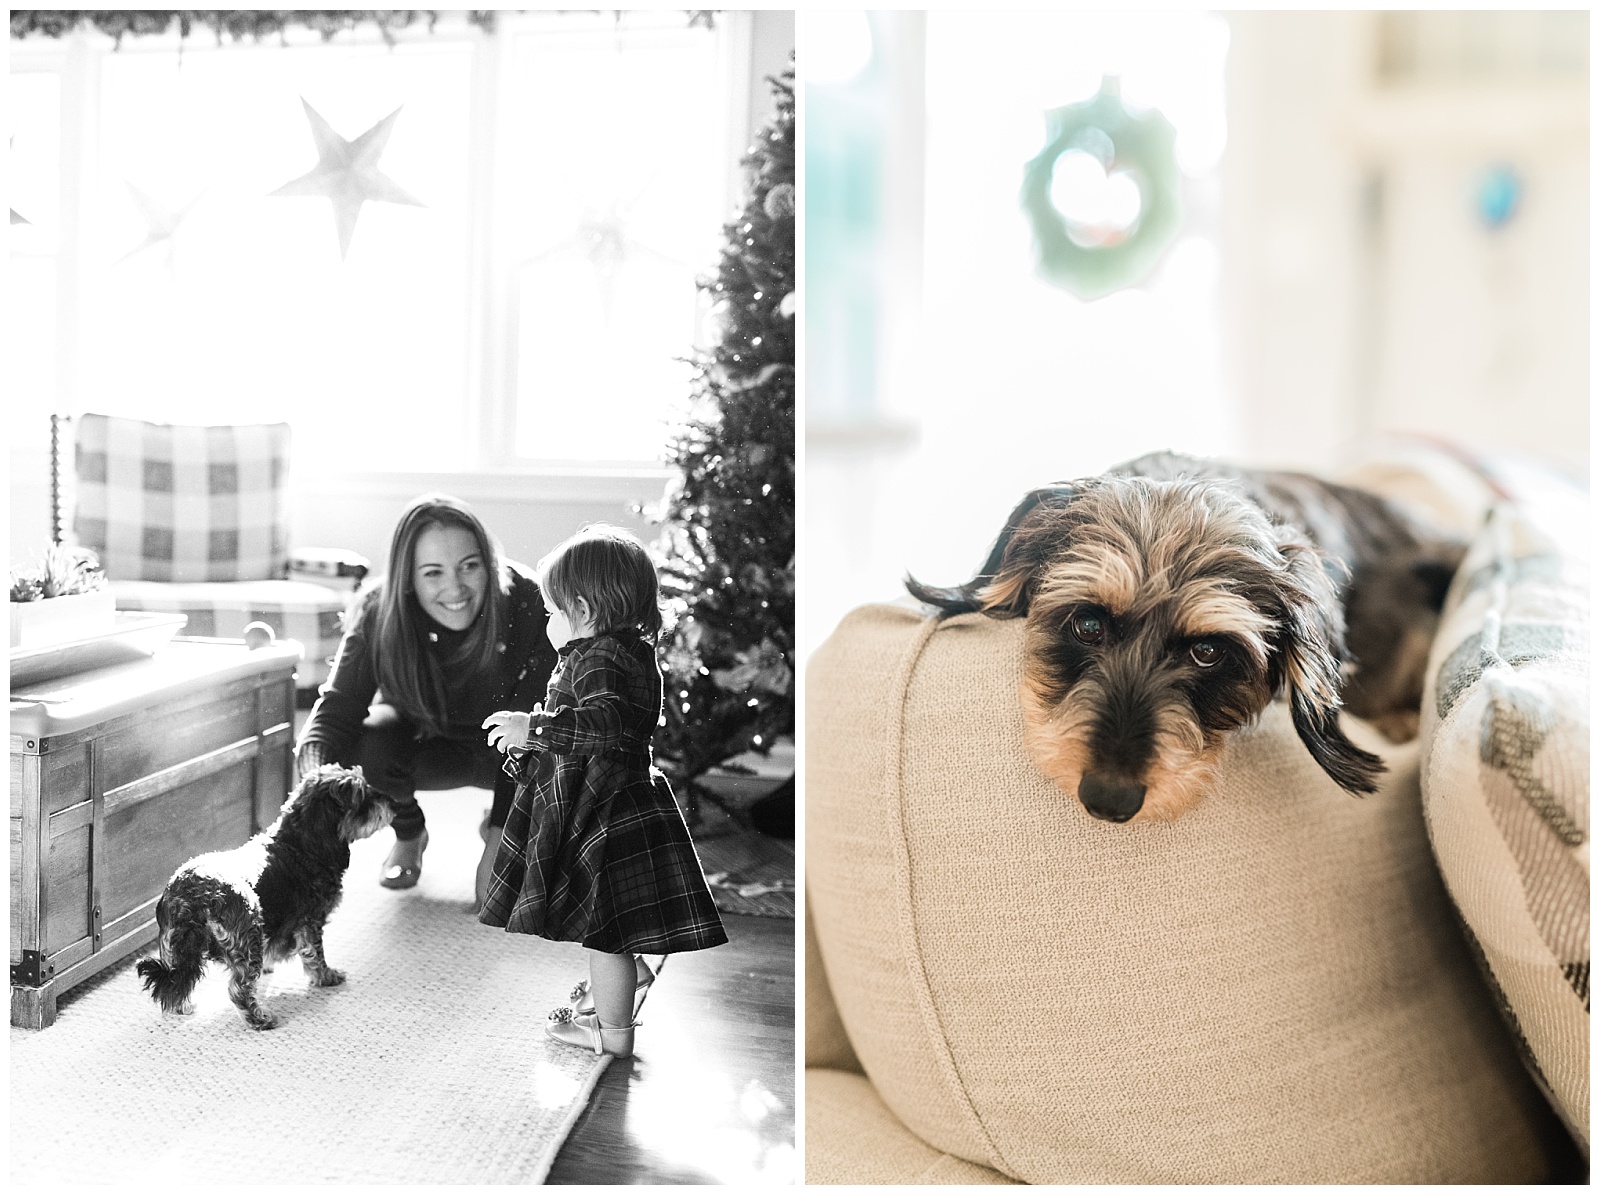 in-home-family-holiday-session-winter-christmas-cozy-photographer-nj-new-jersey-photo_0012.jpg